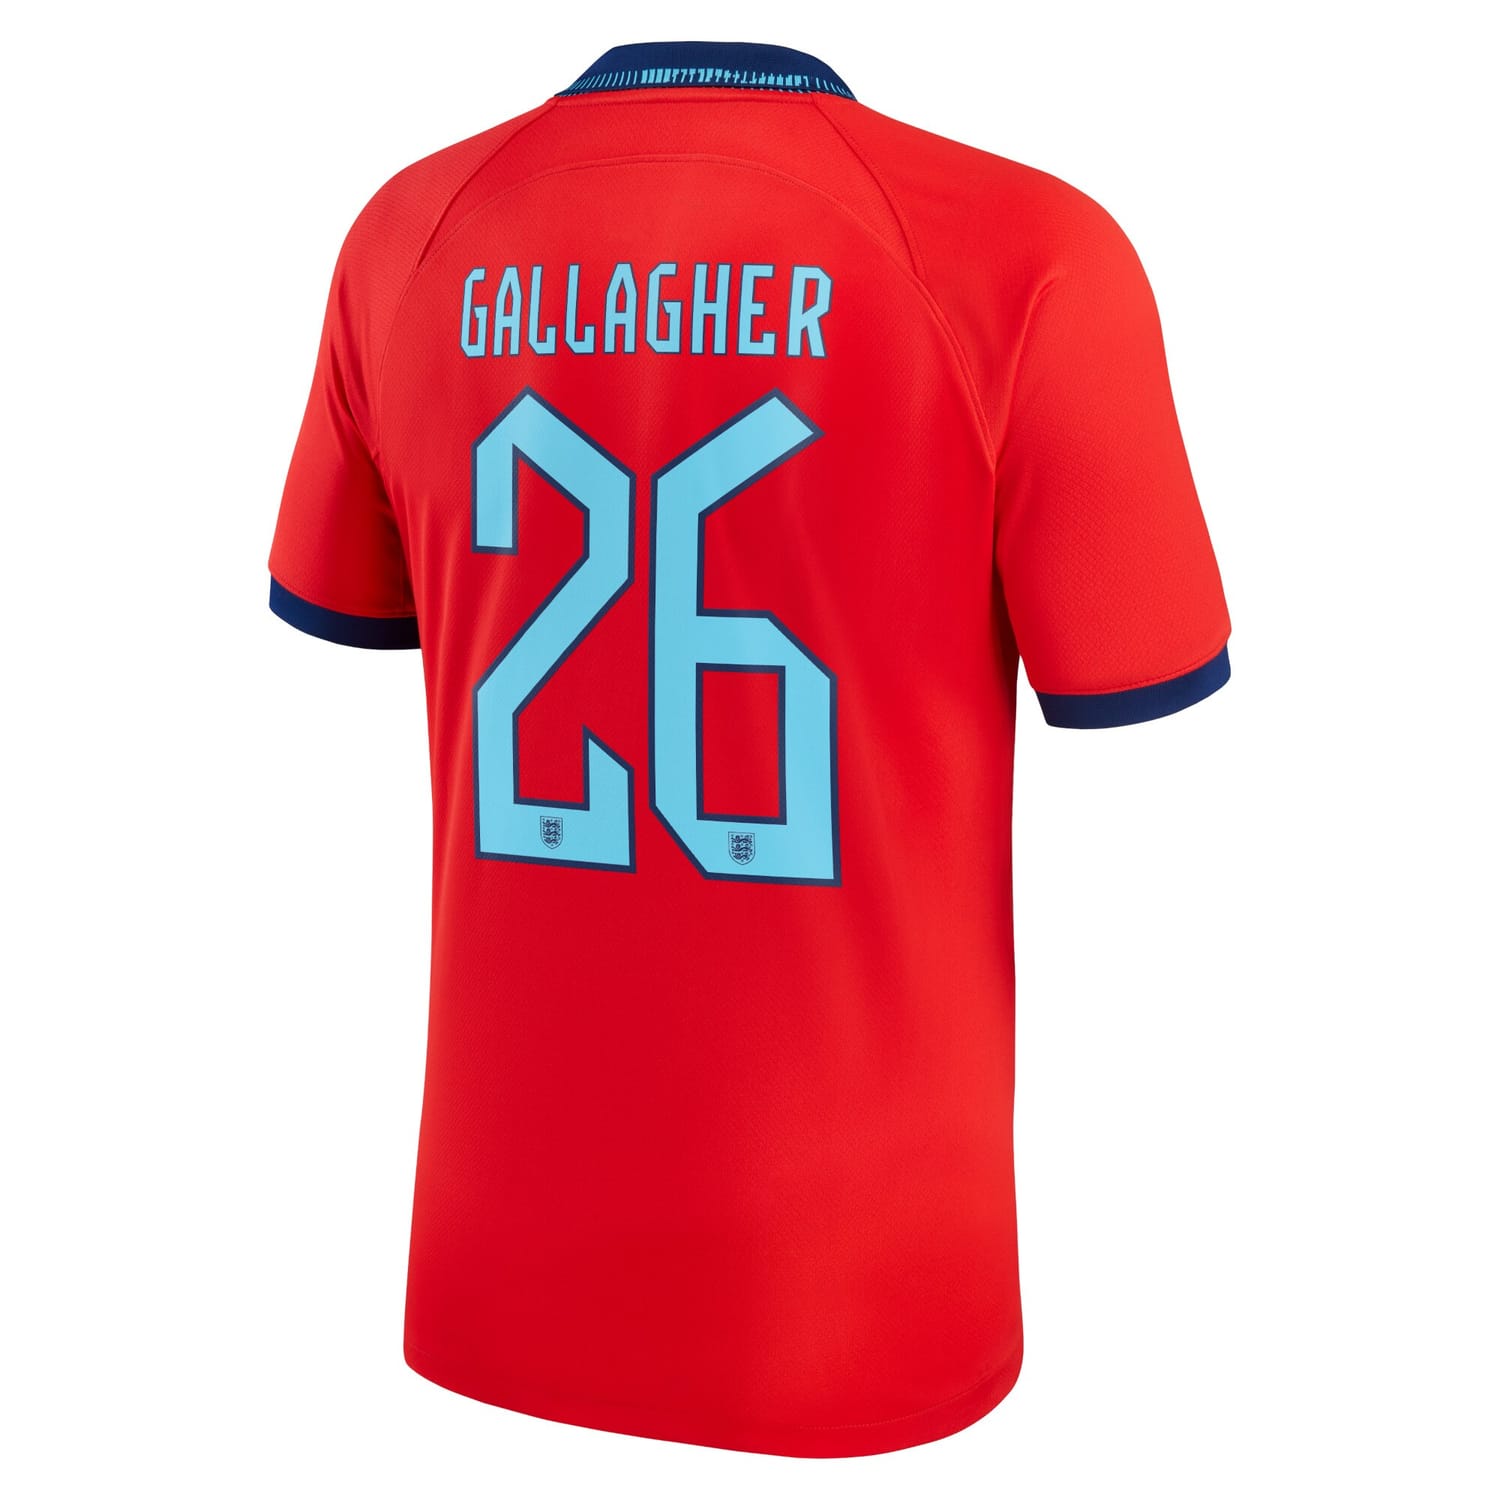 England National Team Away Jersey Shirt 2022 player Conor Gallagher 26 printing for Men